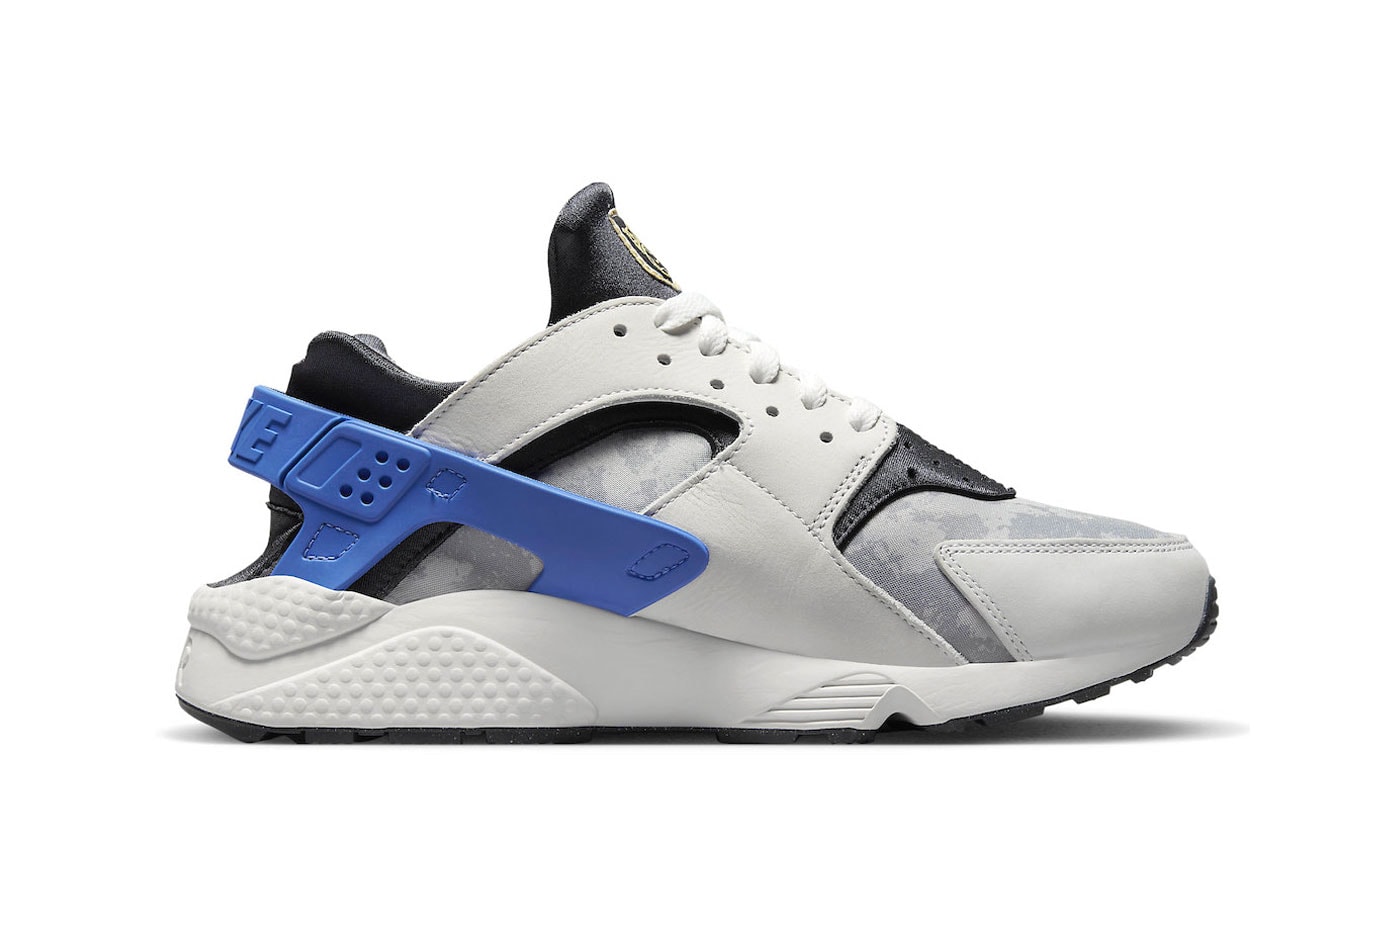 Nike Air Huarache Social FC Soccer light smoke grey summit white anthracite neoprene mesh leather release info date price 135 usd DR0286 100